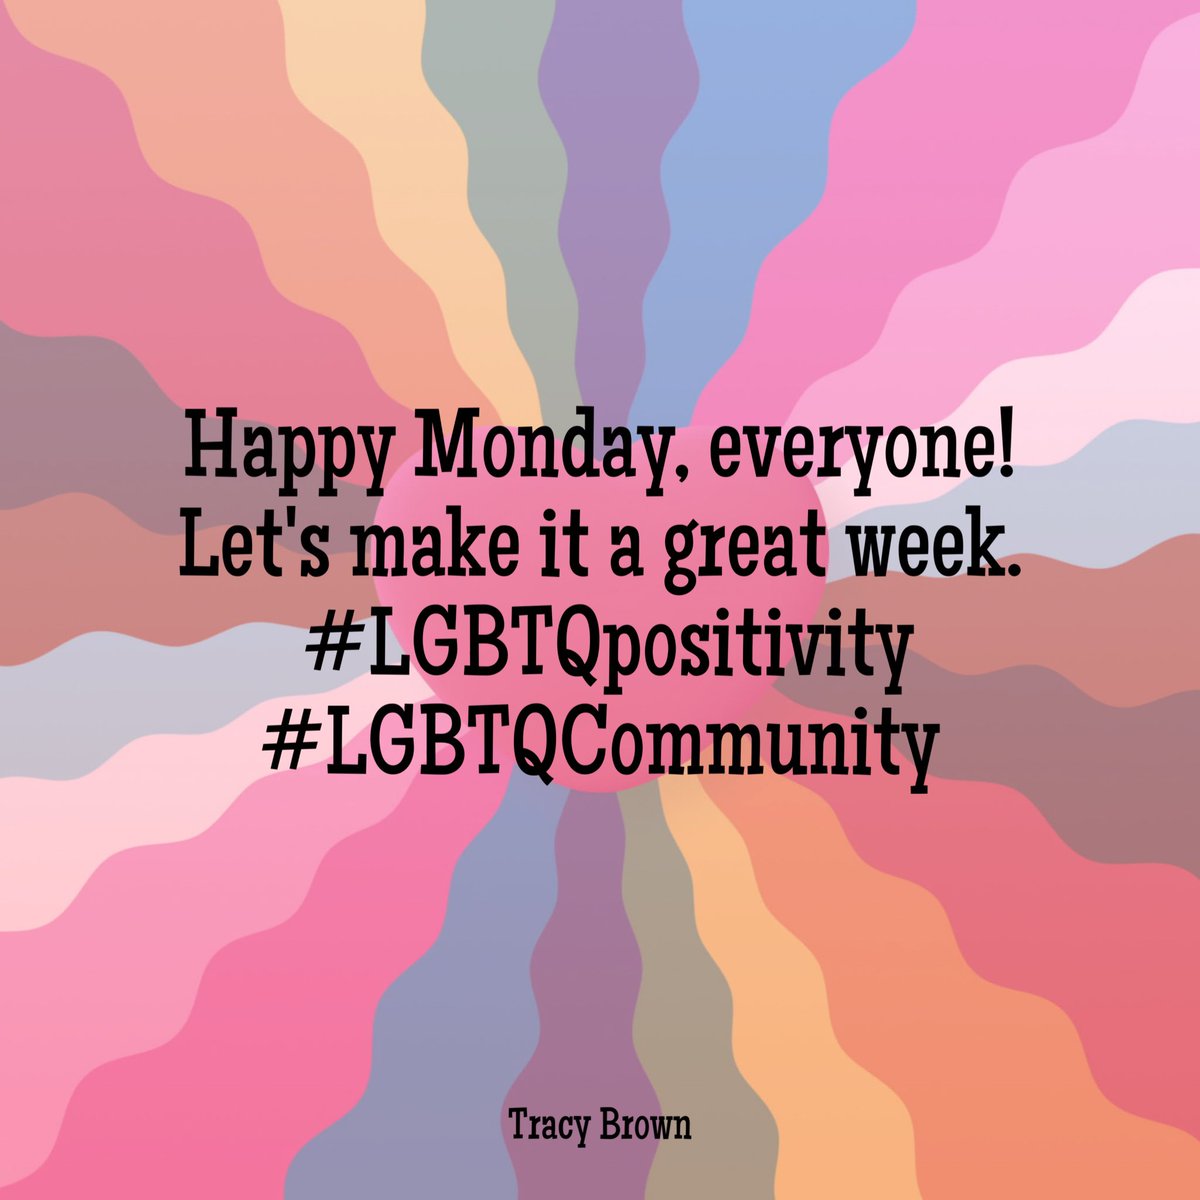 Let’s start the week on a positive note. 

#LGBTQ | #LGBTQCommunity 🏳️‍🌈🏳️‍⚧️